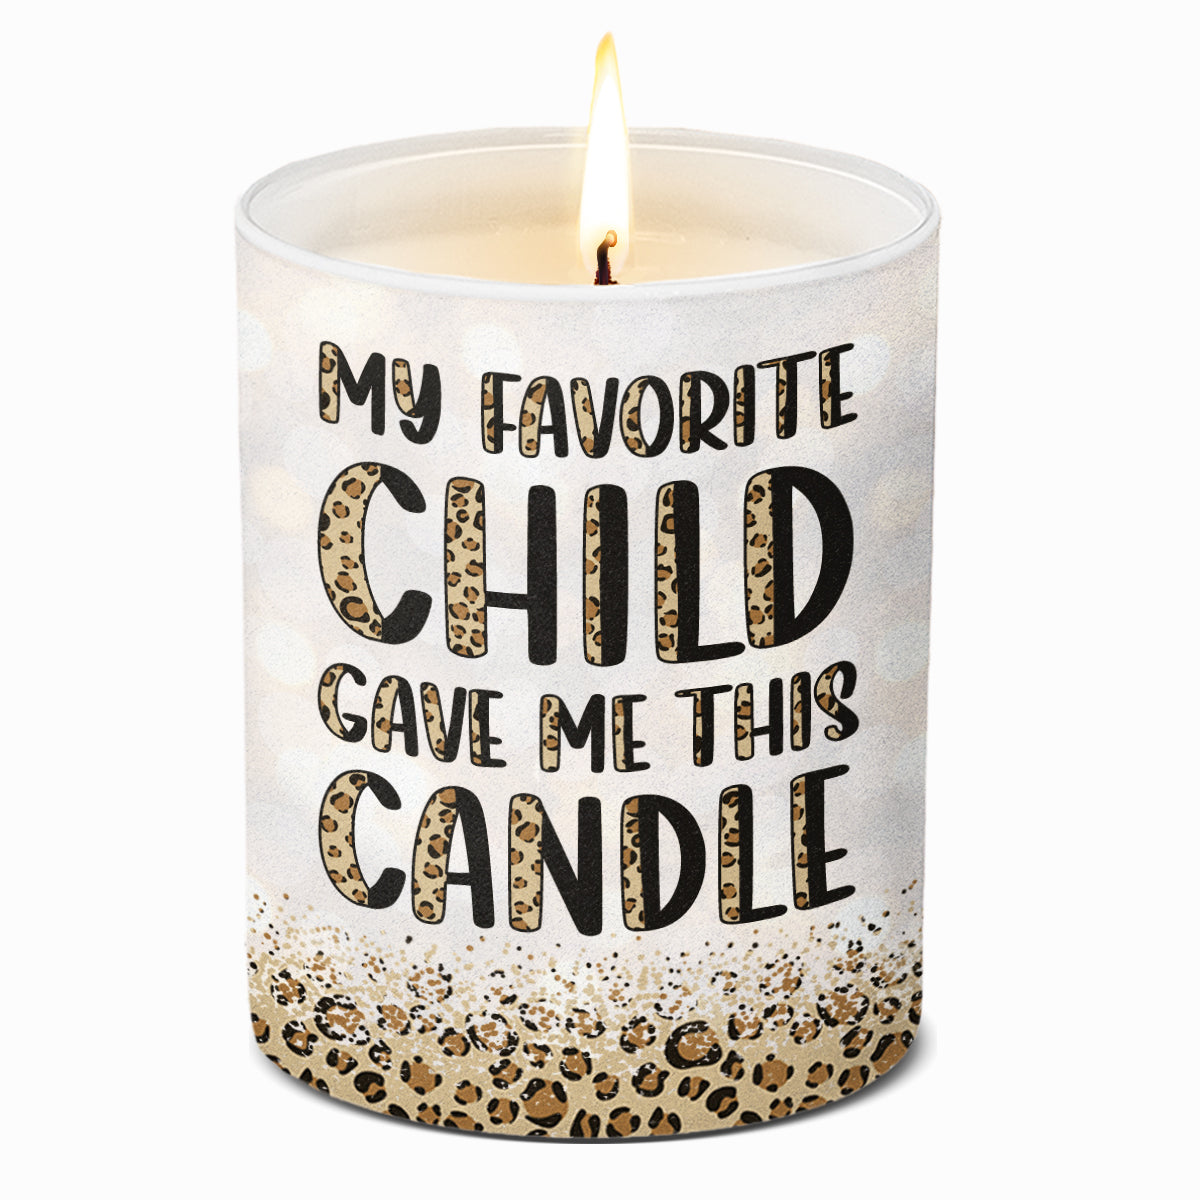 My Favorite Child Gave Me This Candle - Family Smokeless Scented